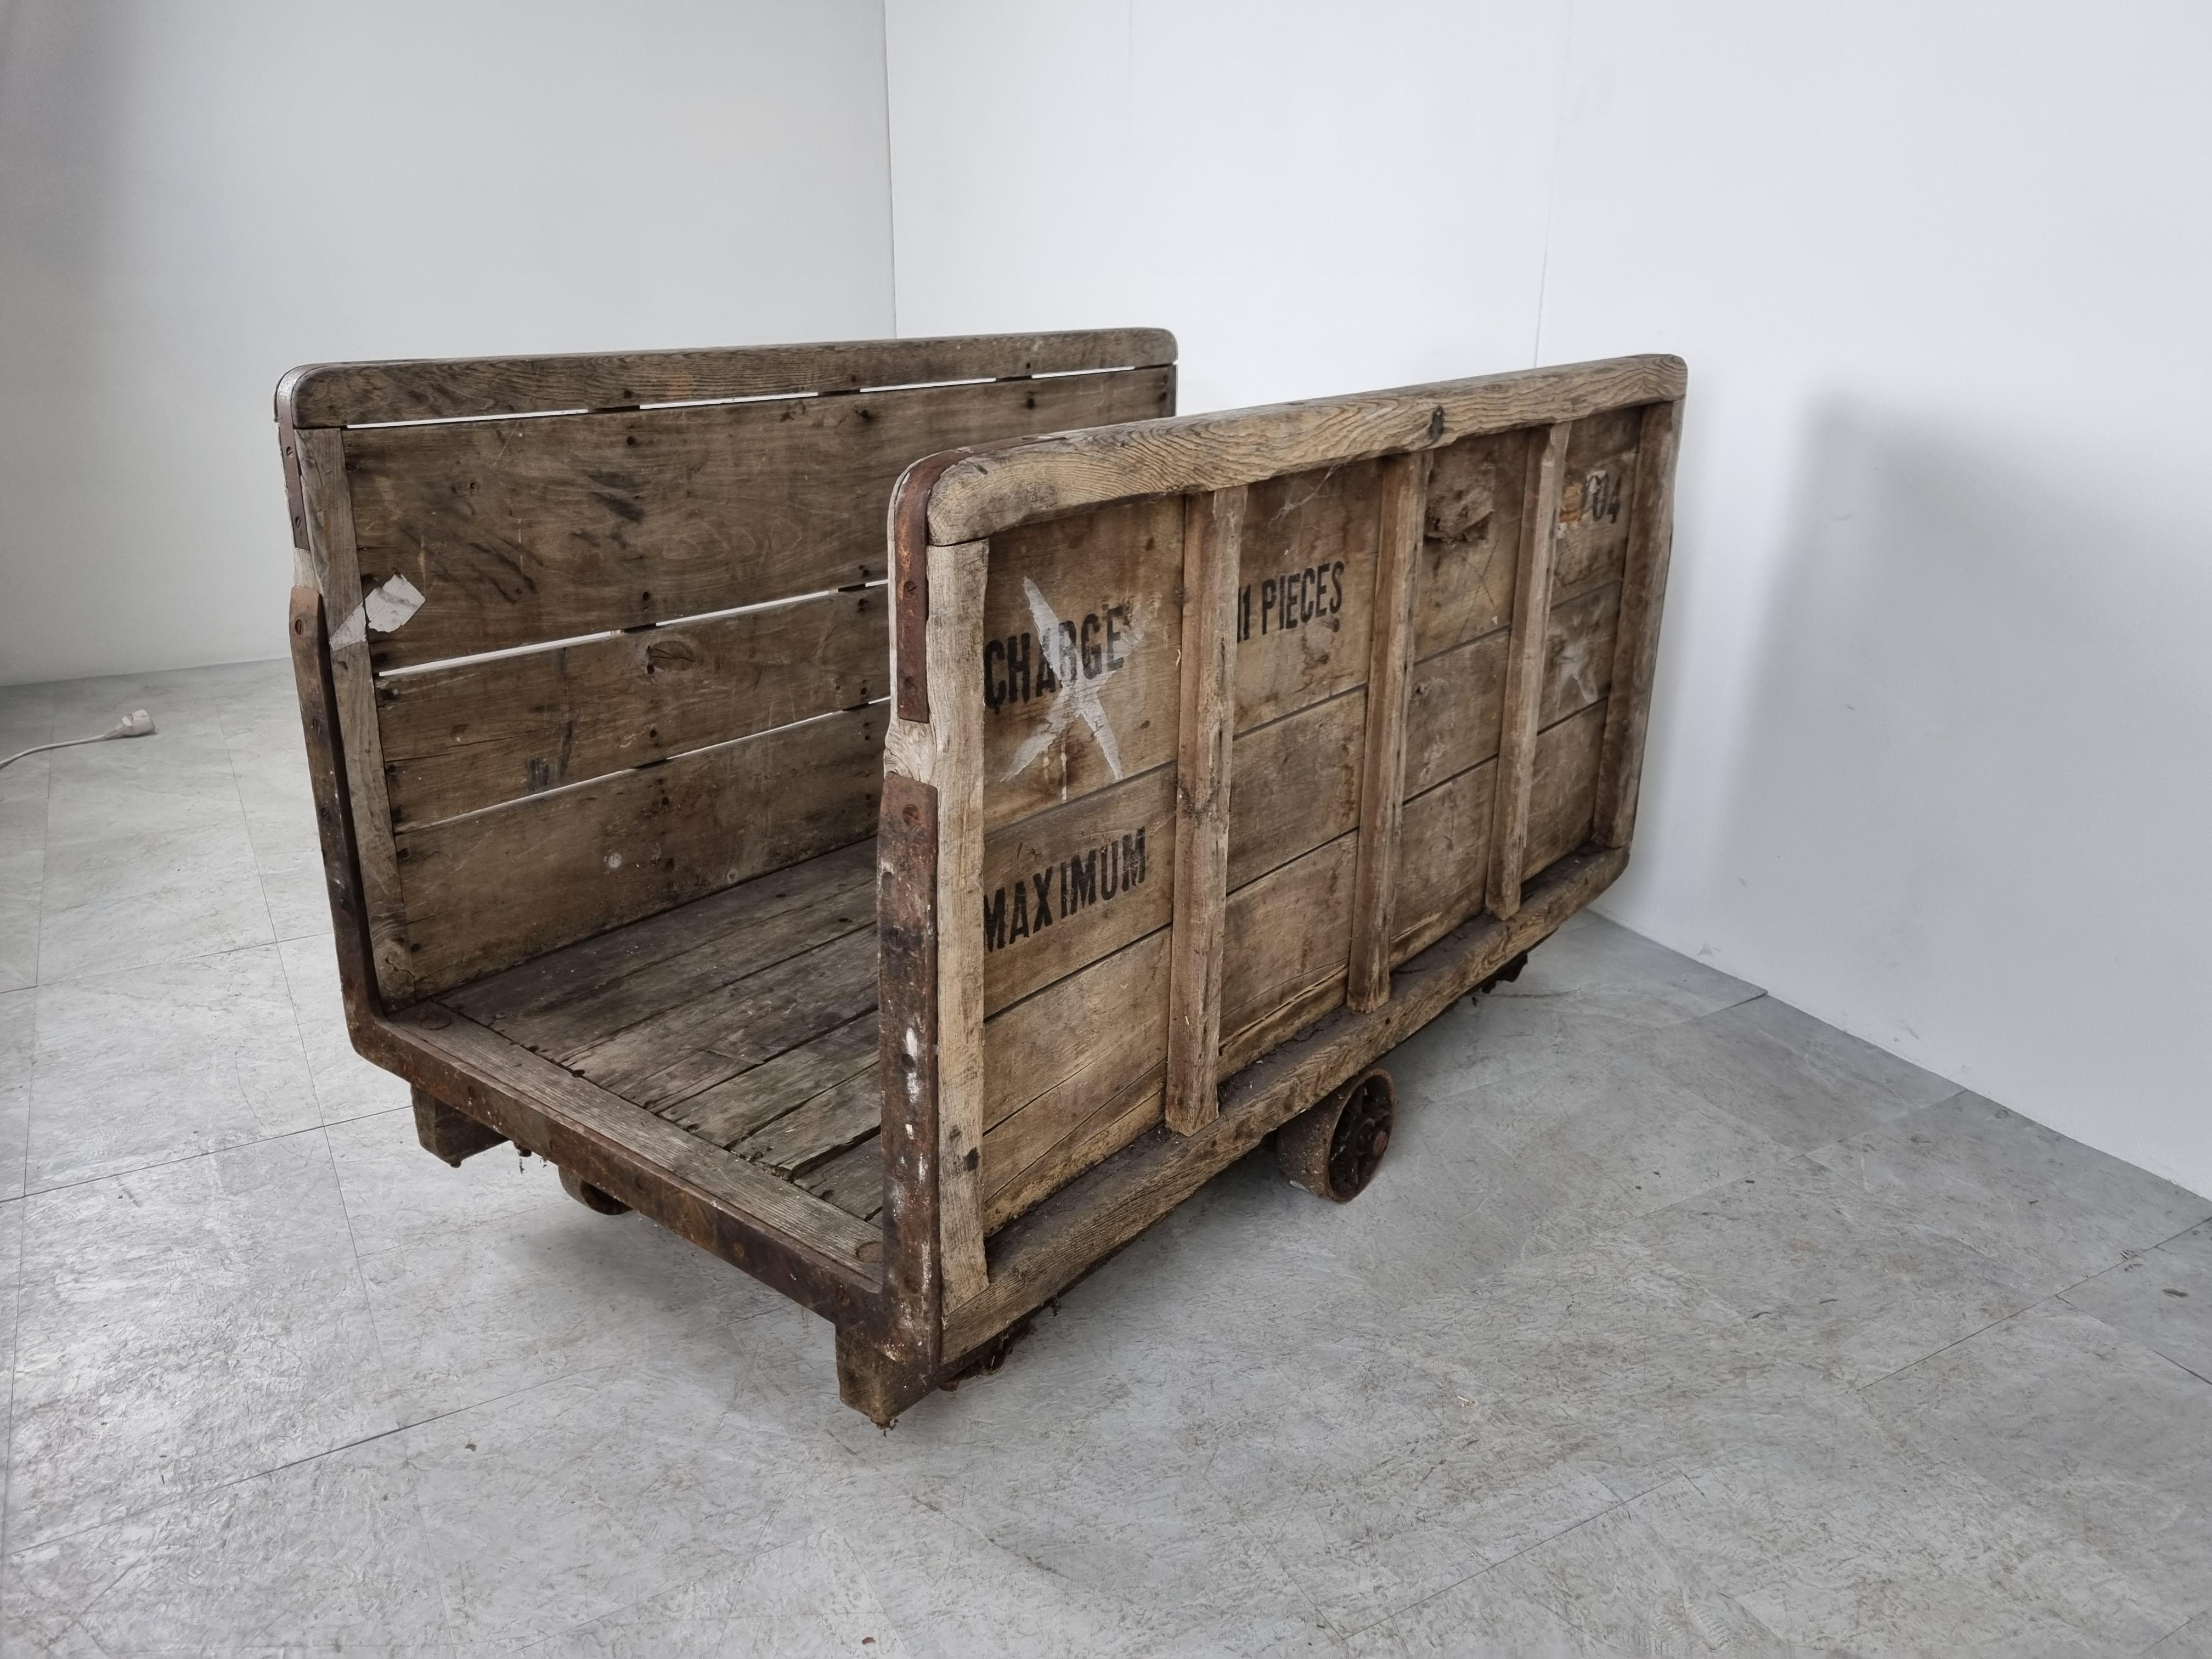 Very large antique industrial trolley/warehouse cart made from thick wood and cast iron wheels.

This heavy duty cart was probably used in a big factory where a few of these carts would have been used to transport products within the